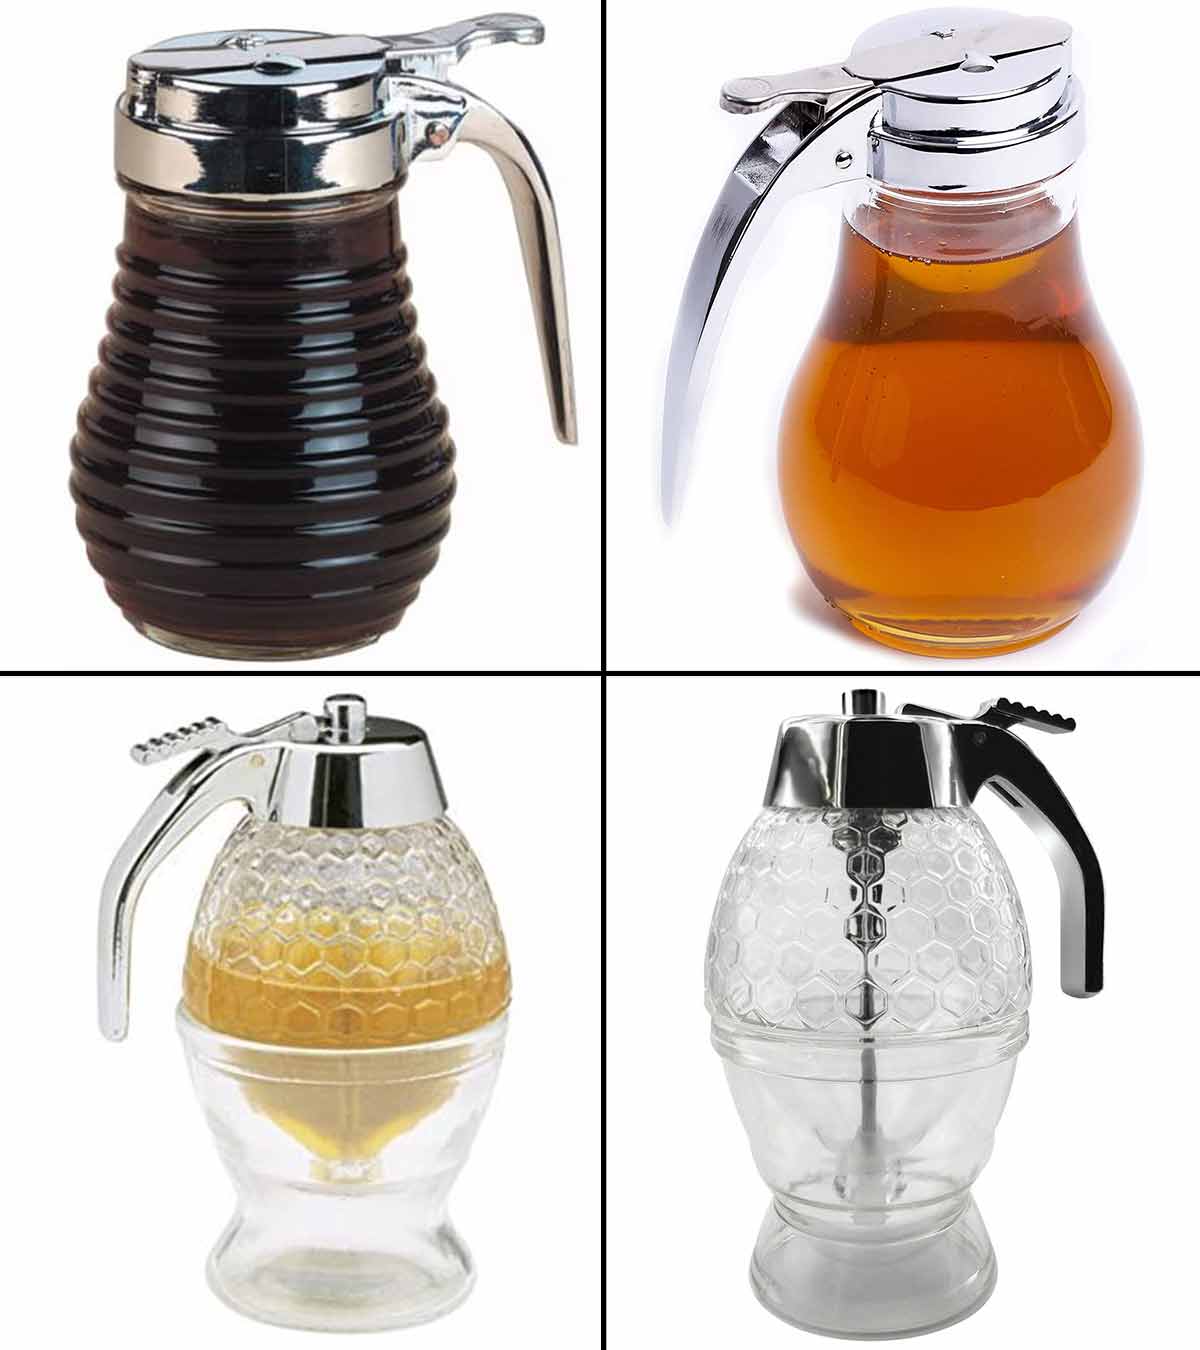 Syrup Dispenser,Kids Friendly Honey Jar Refill,Honey Dispenser with Counter Top Storage Stand and Stopper,Shatter Proof & BPA Free,No Drip Renewed 200ML honey jar and dipper Moderate Flow